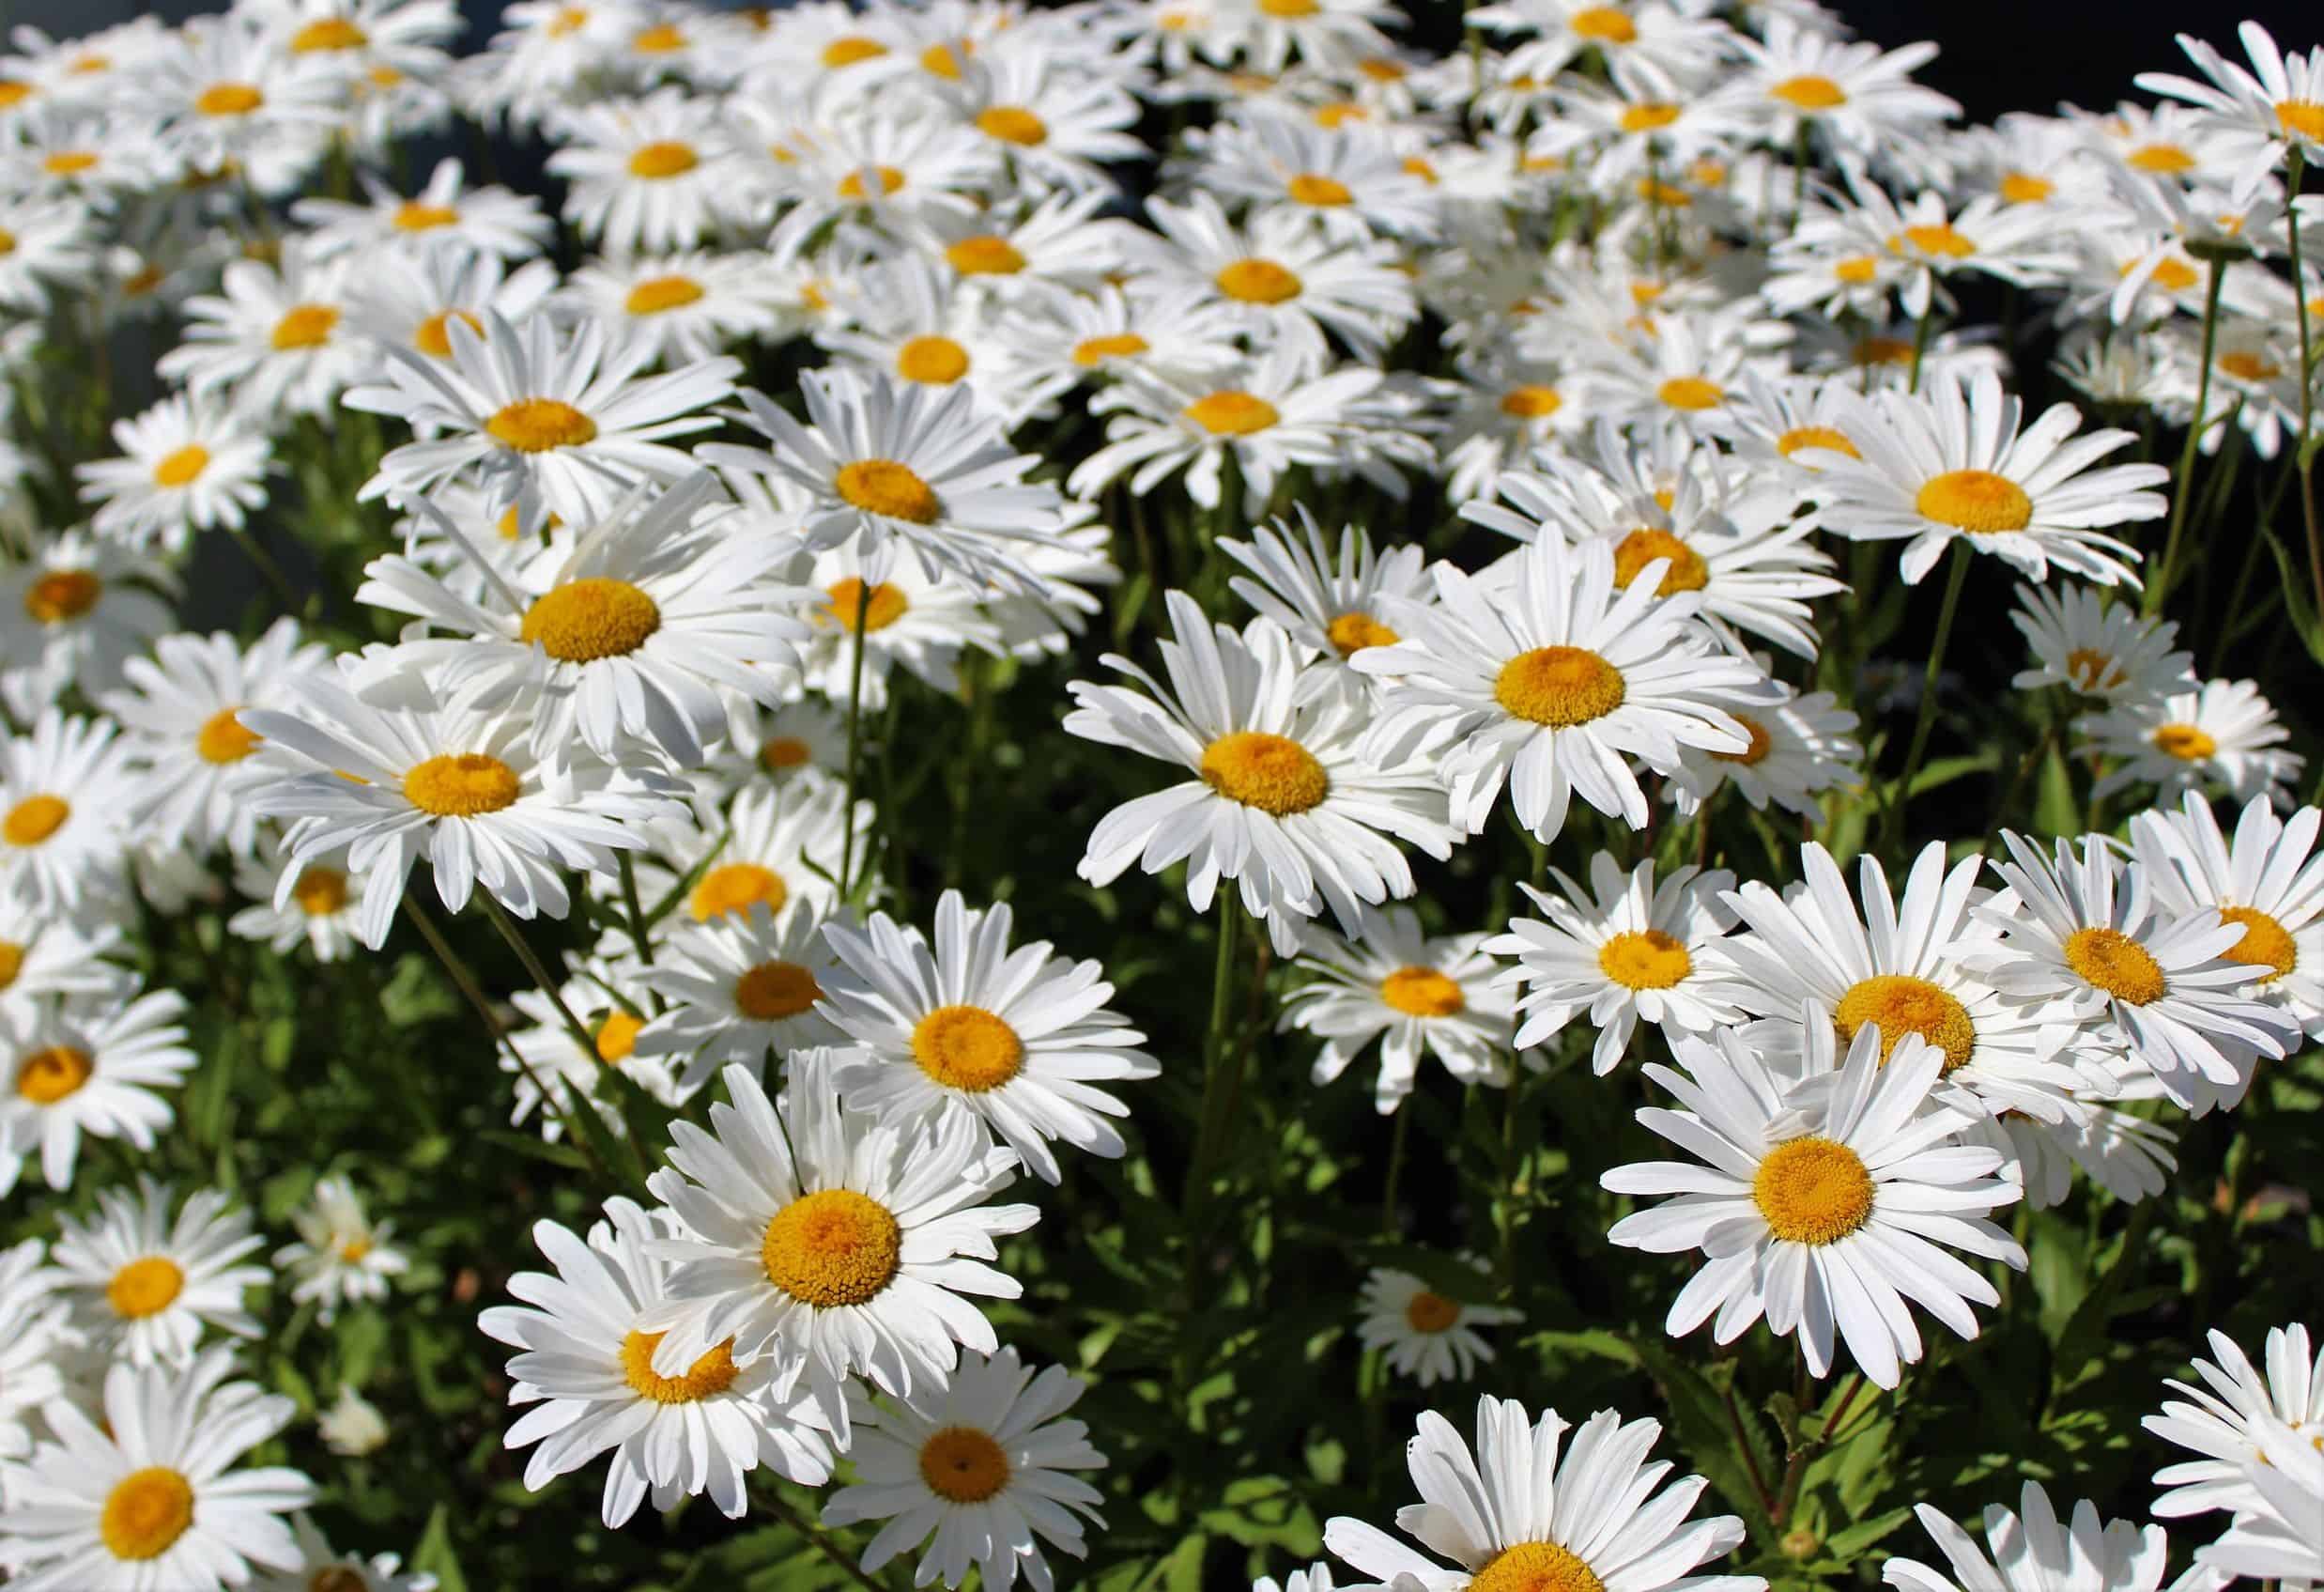 Shasta daisies have a long blooming time.